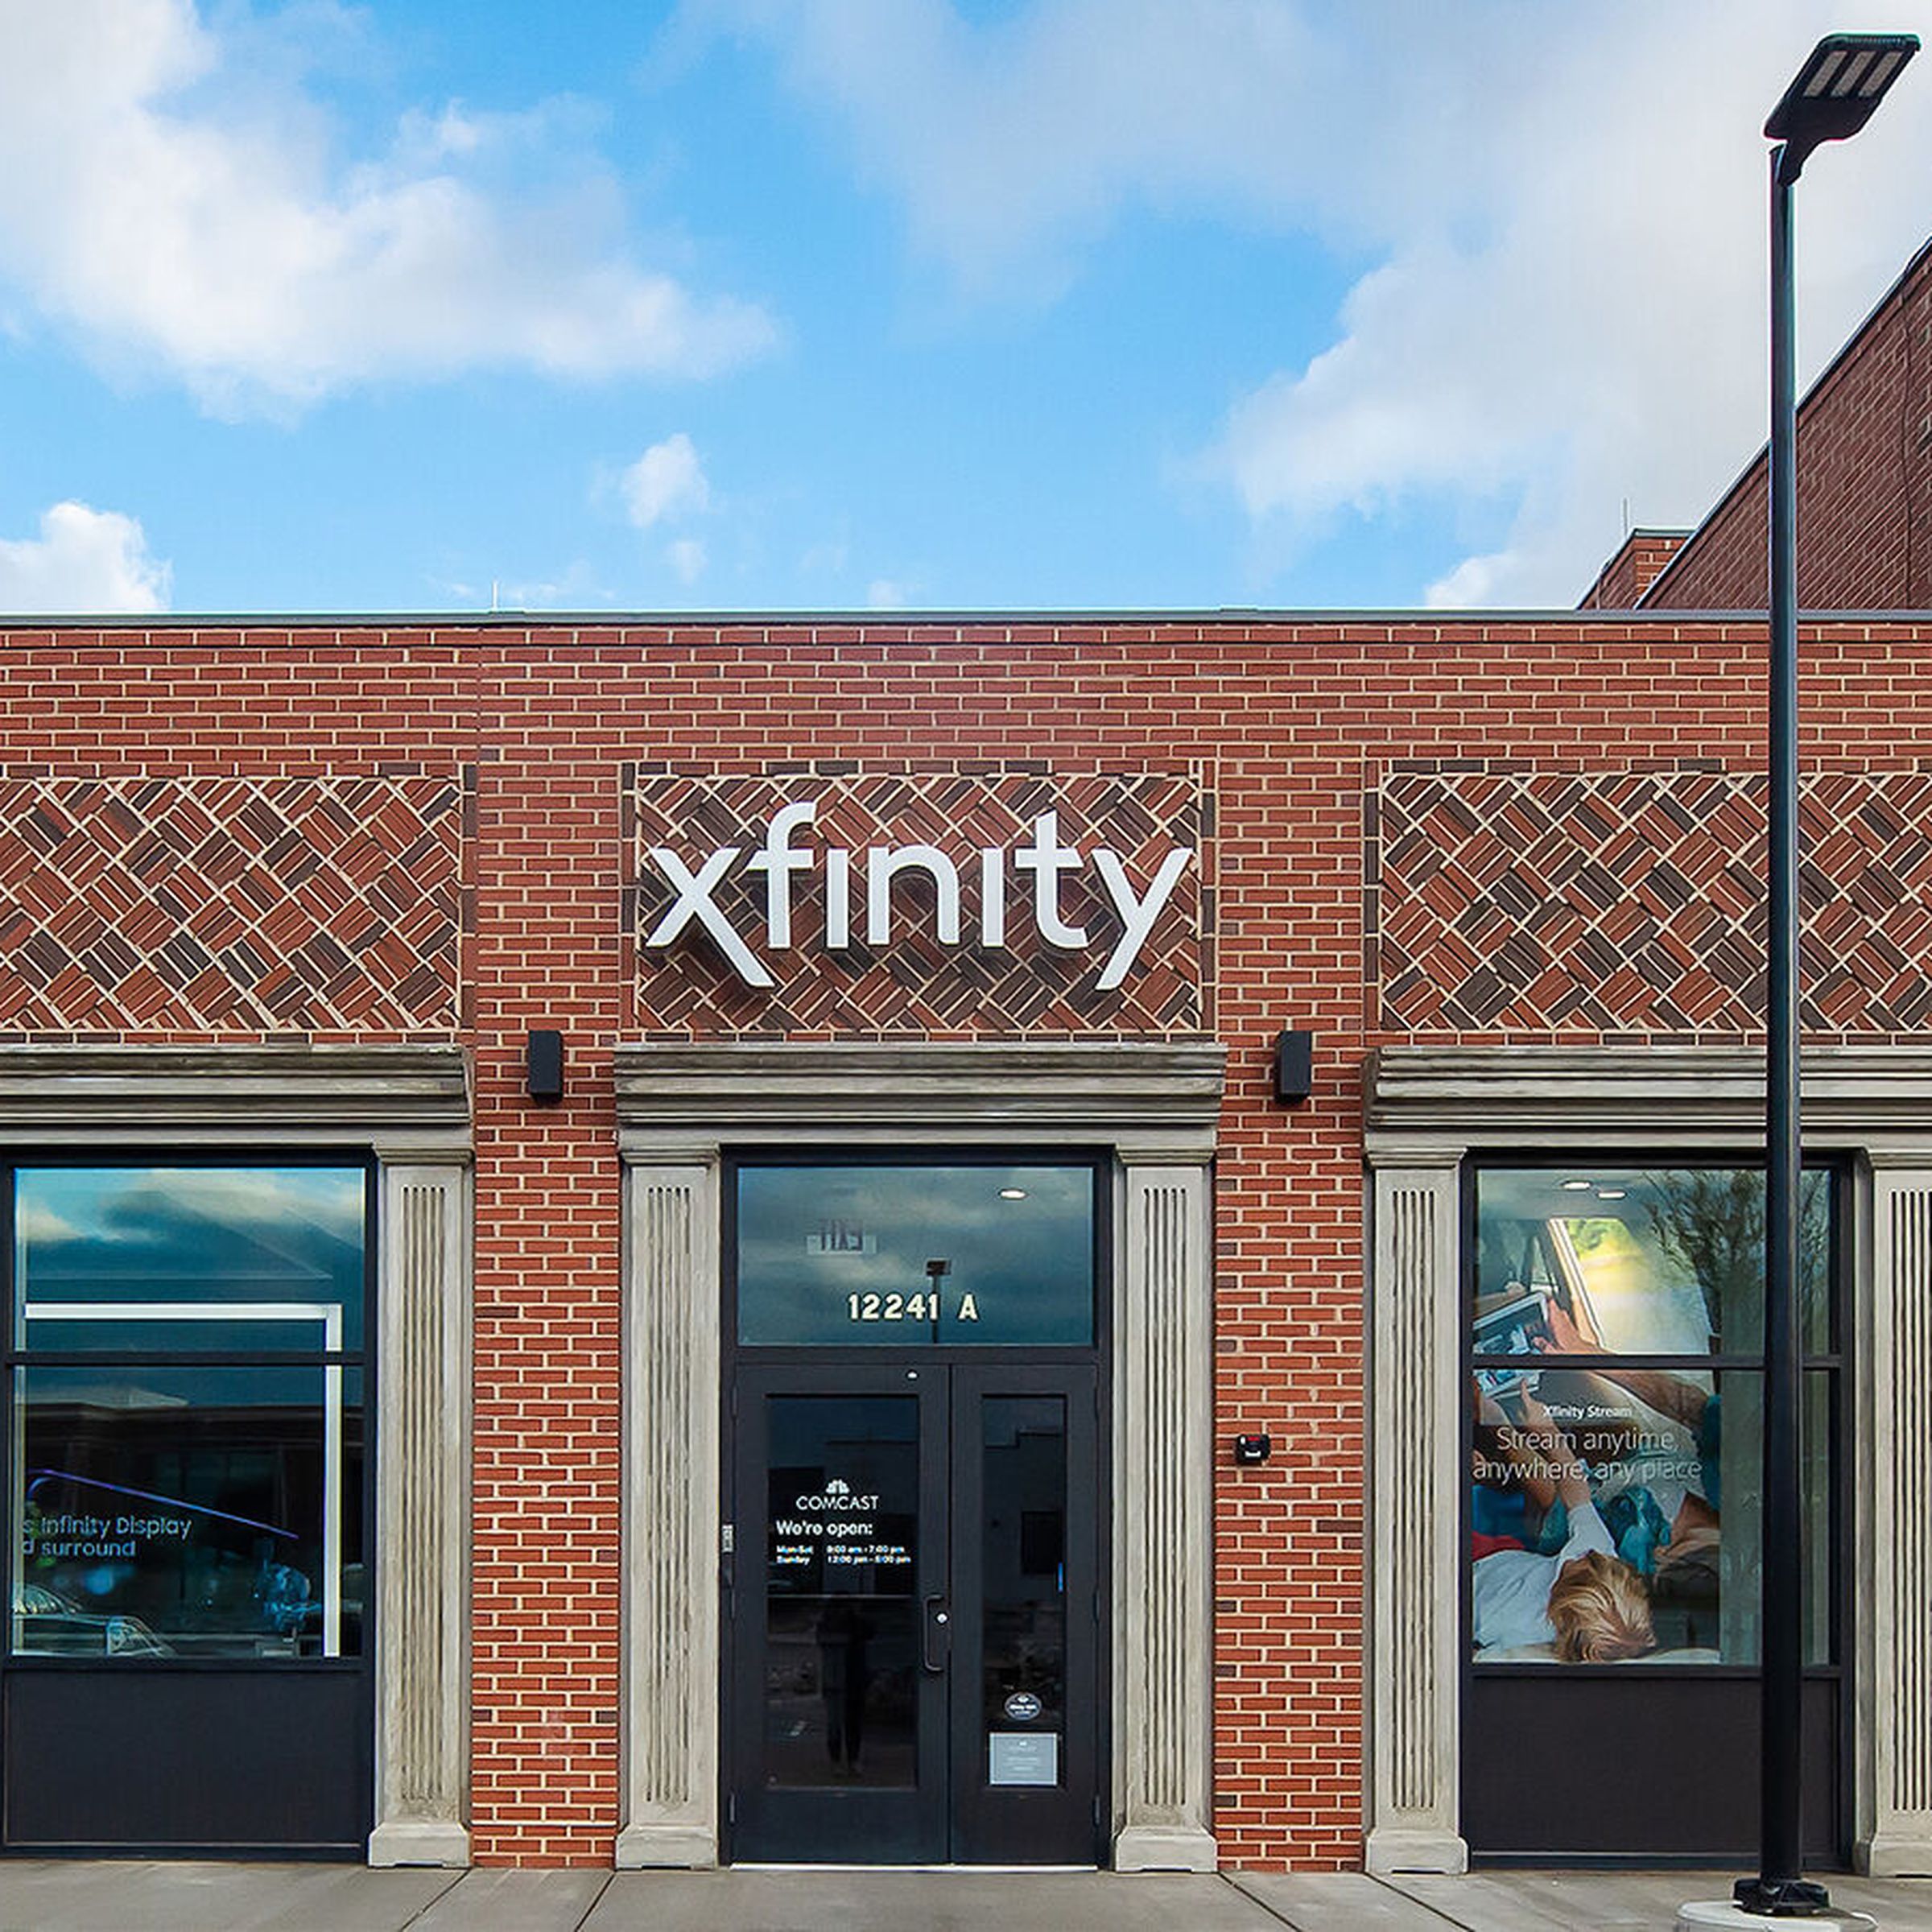 A photo showing an Xfinity storefront